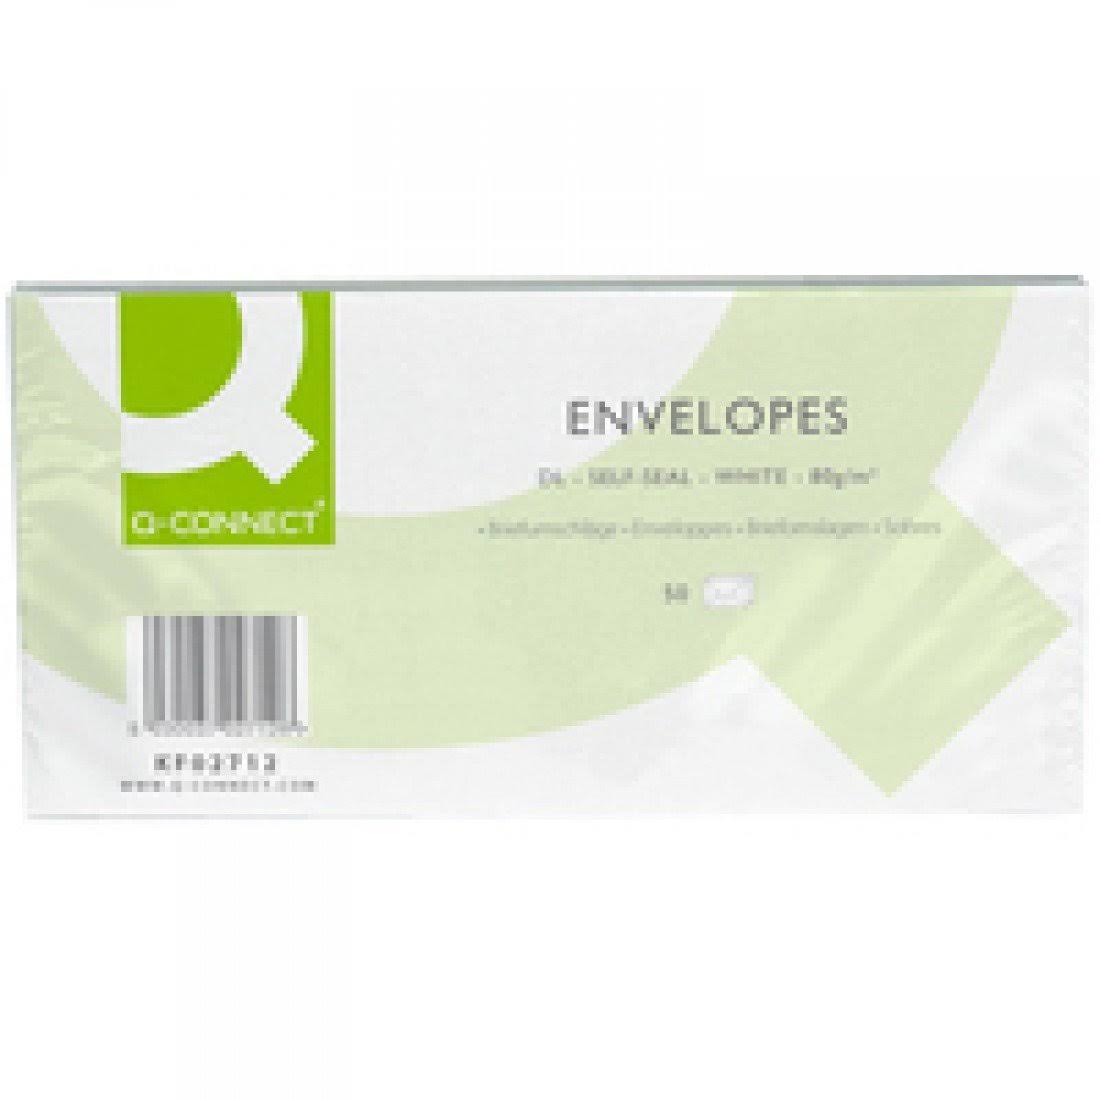 Q Connect DL Envelopes 80gsm Self Seal White Pack of 1000 KF02712